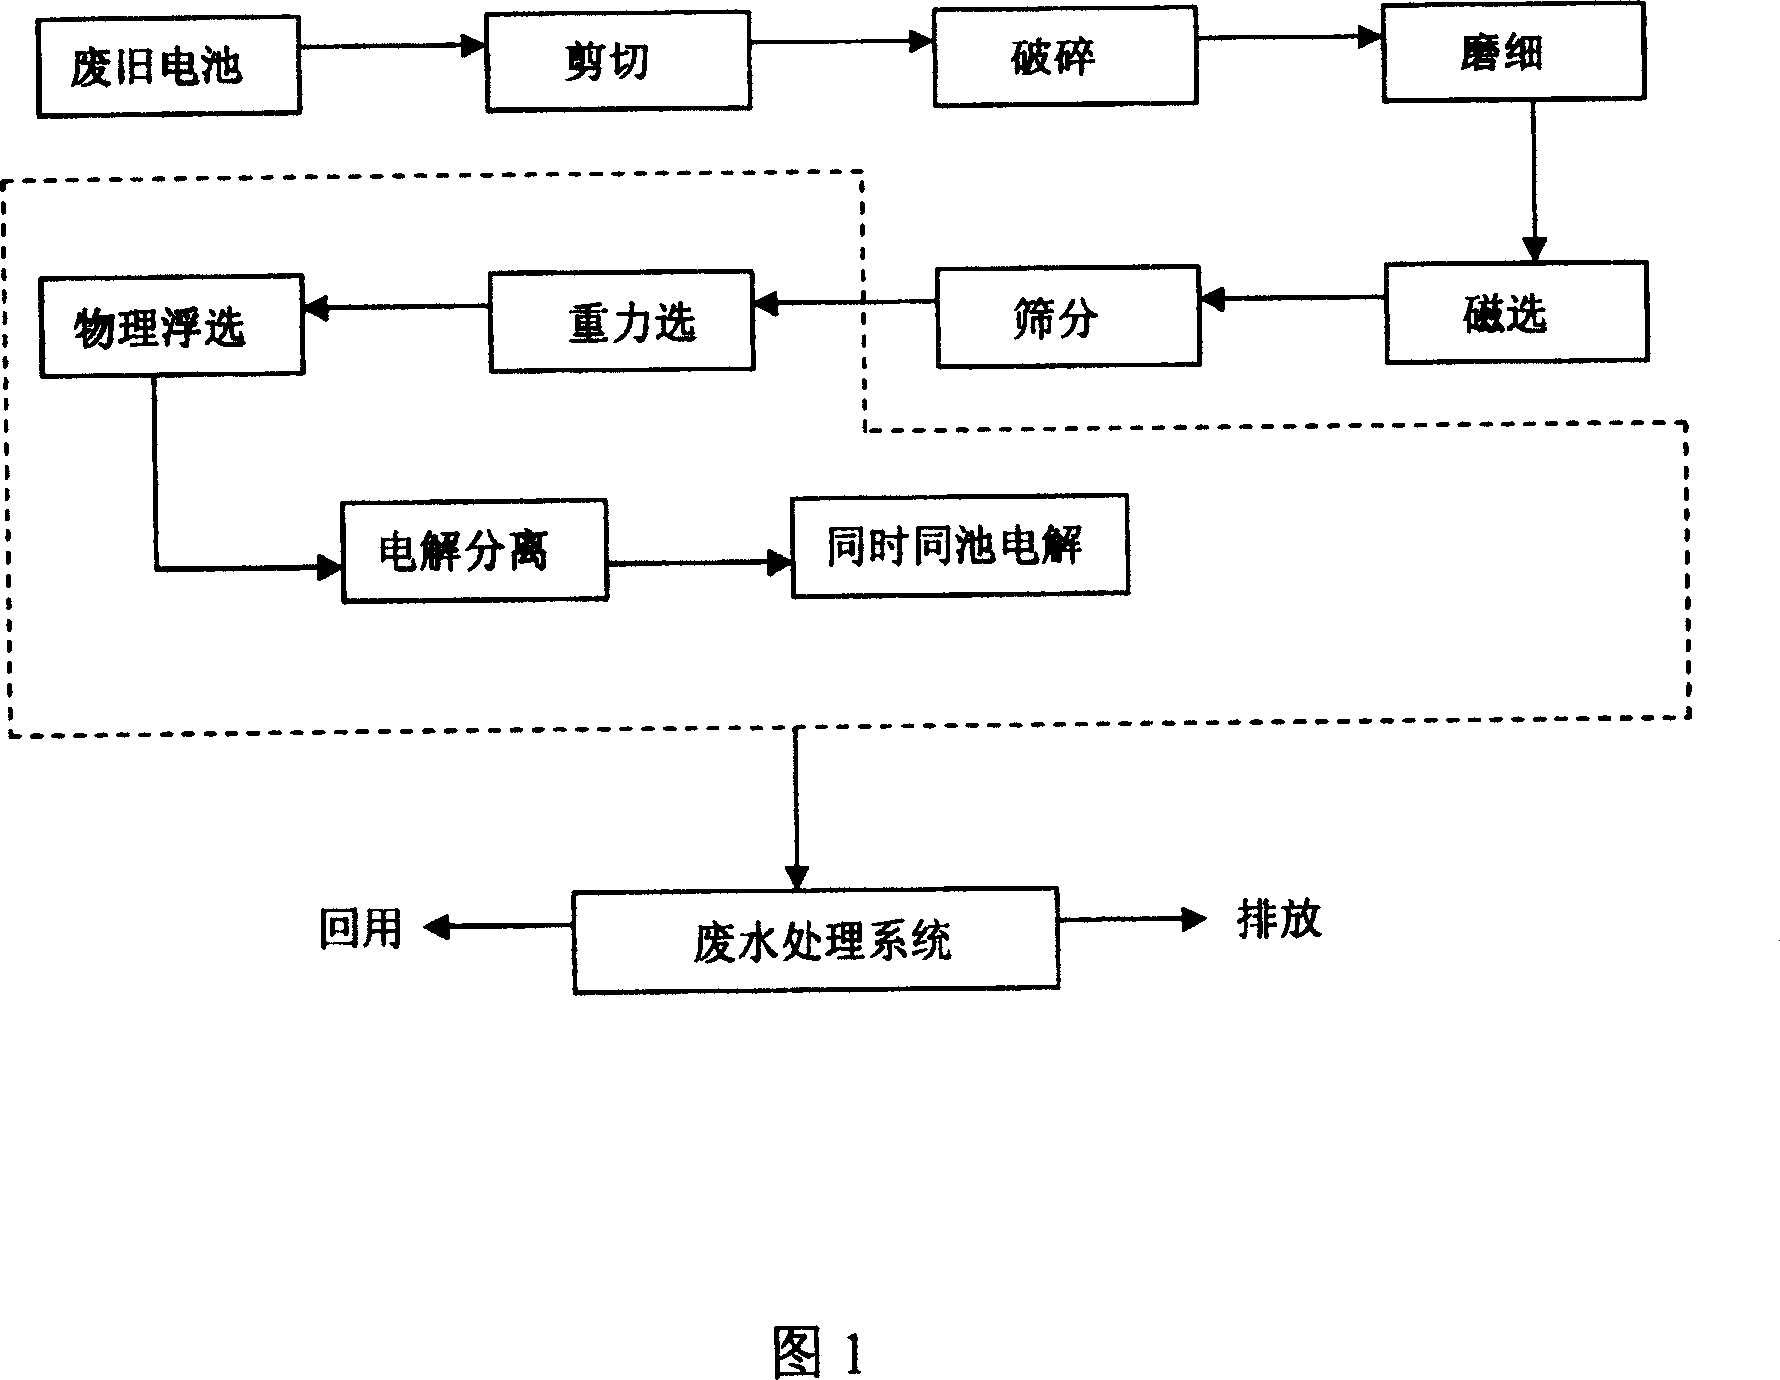 Process for separating and purifying zinc and manganese dioxide in compositive treating waste battery